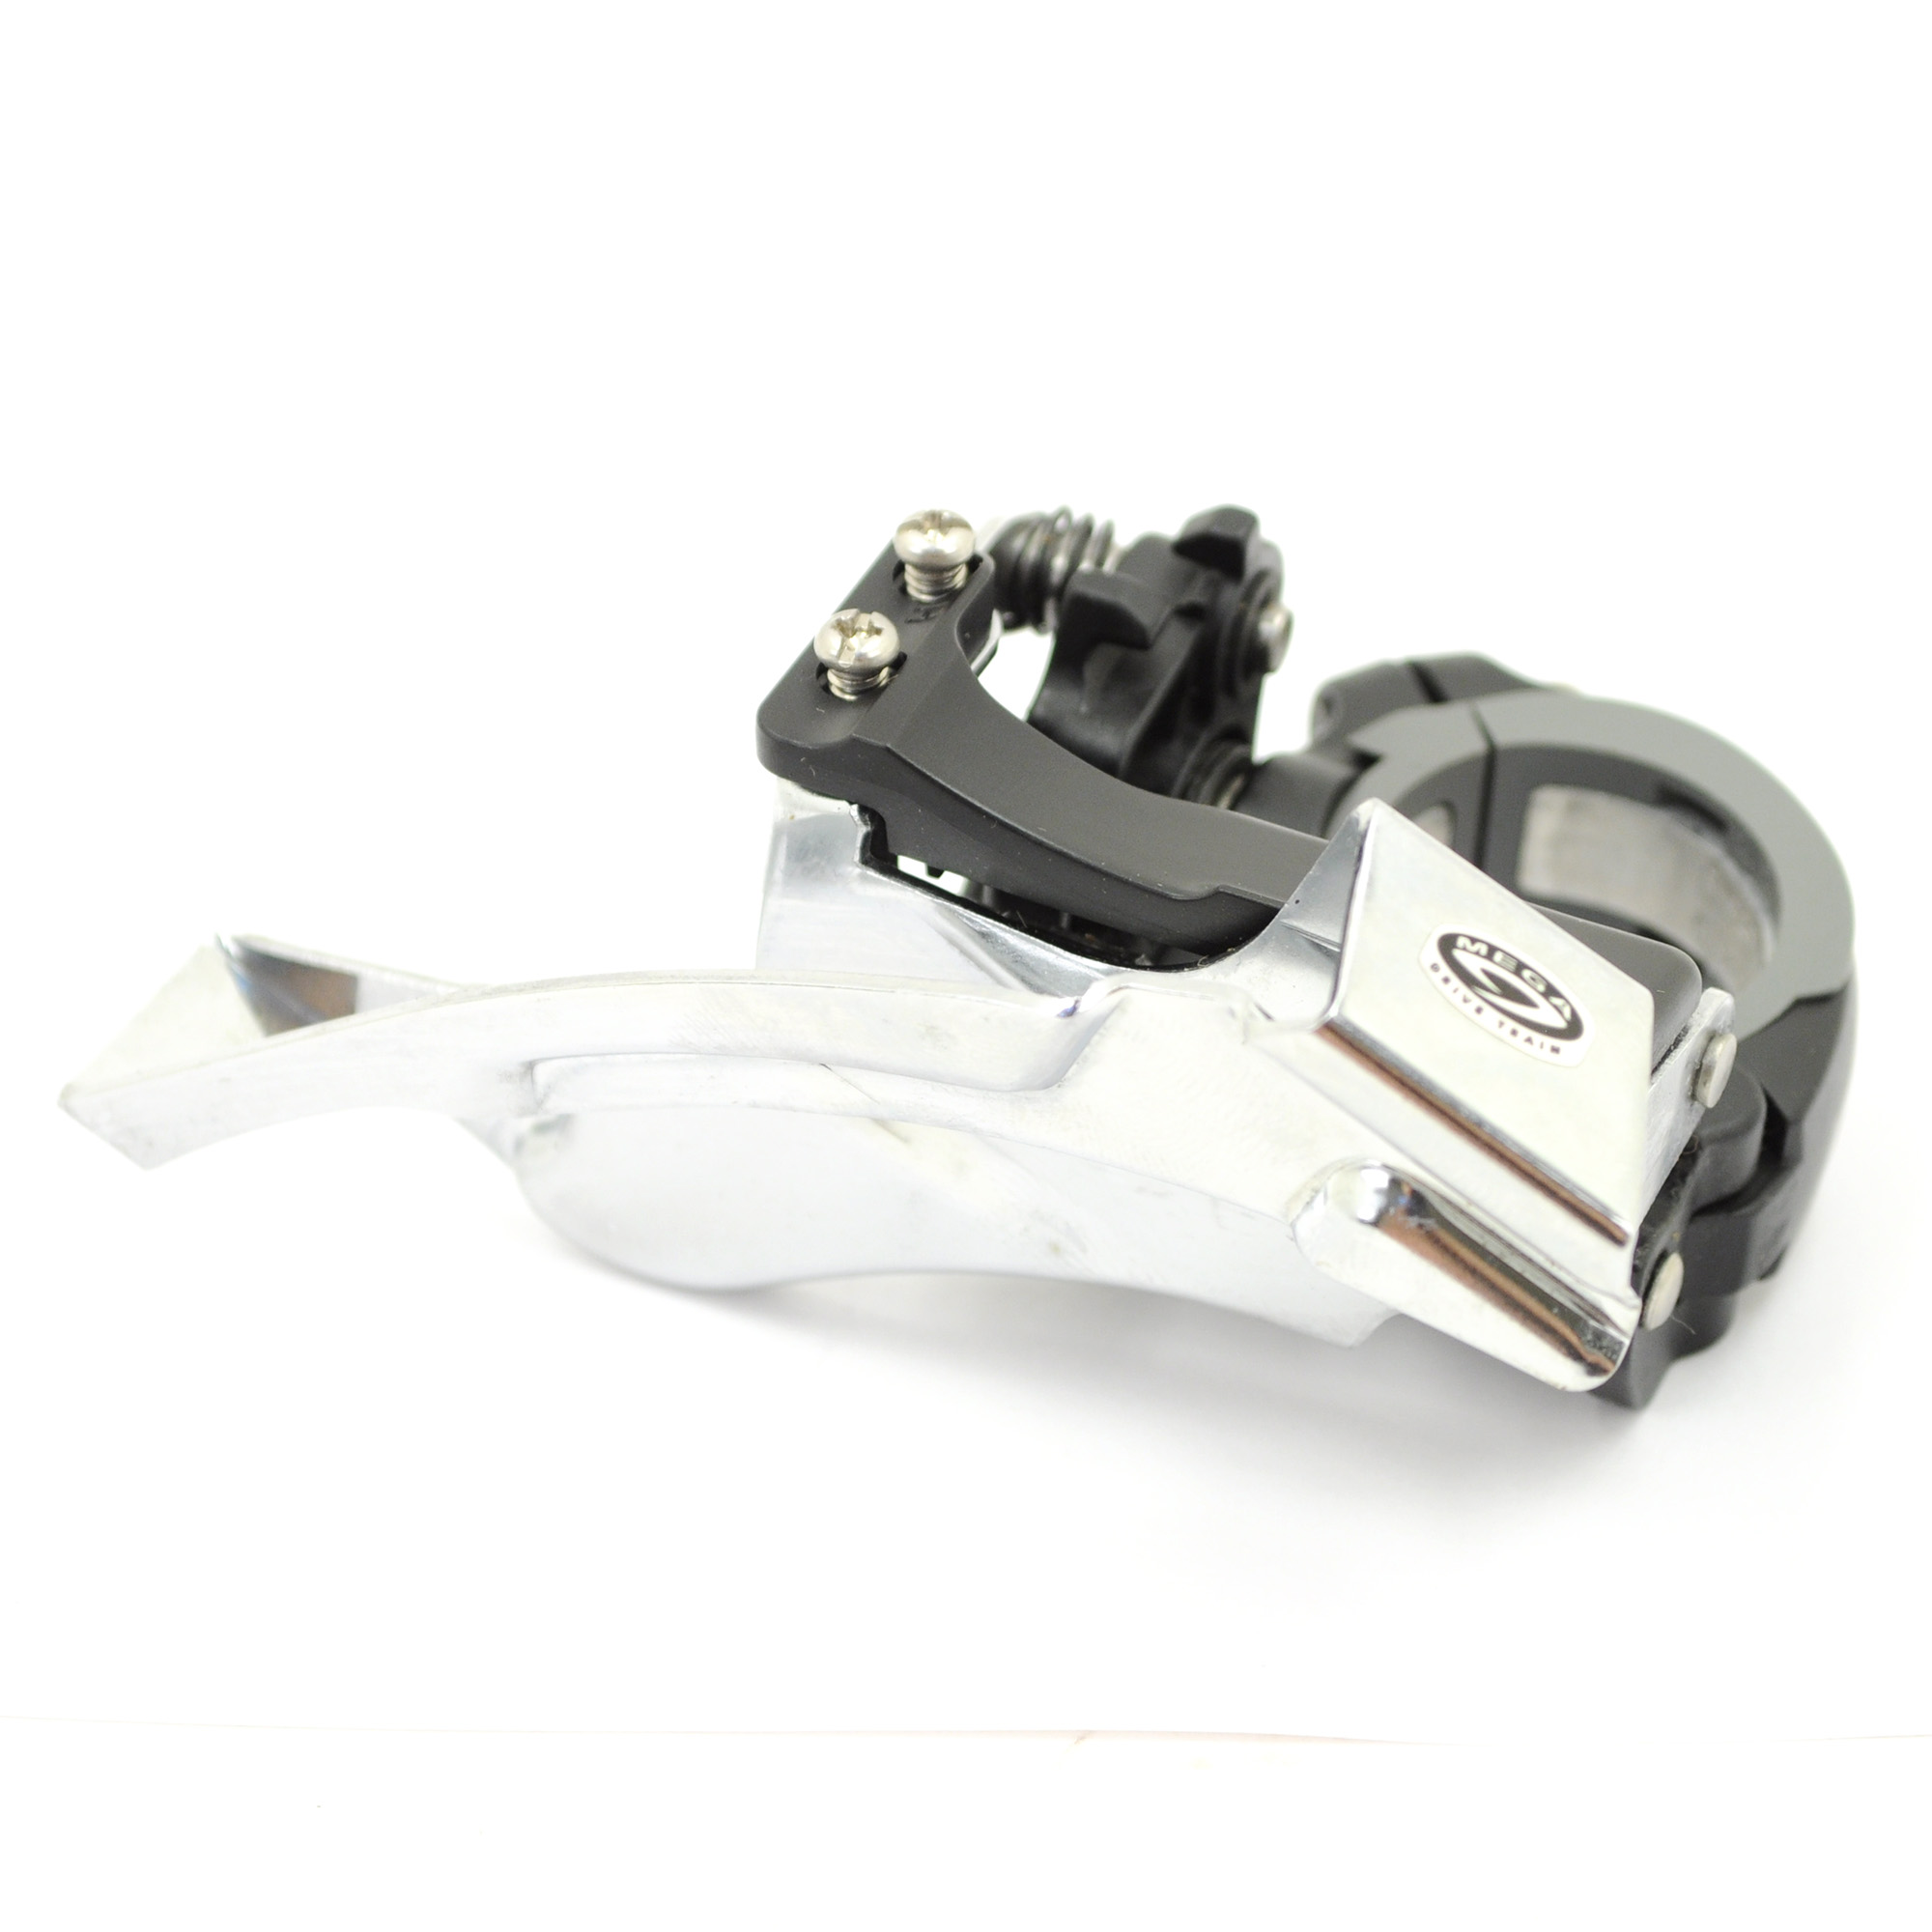 Shimano Deore FD-M530 Mountain Bike Front Derailleur // 3x9-Speed // 34.9mm - image 1 of 3